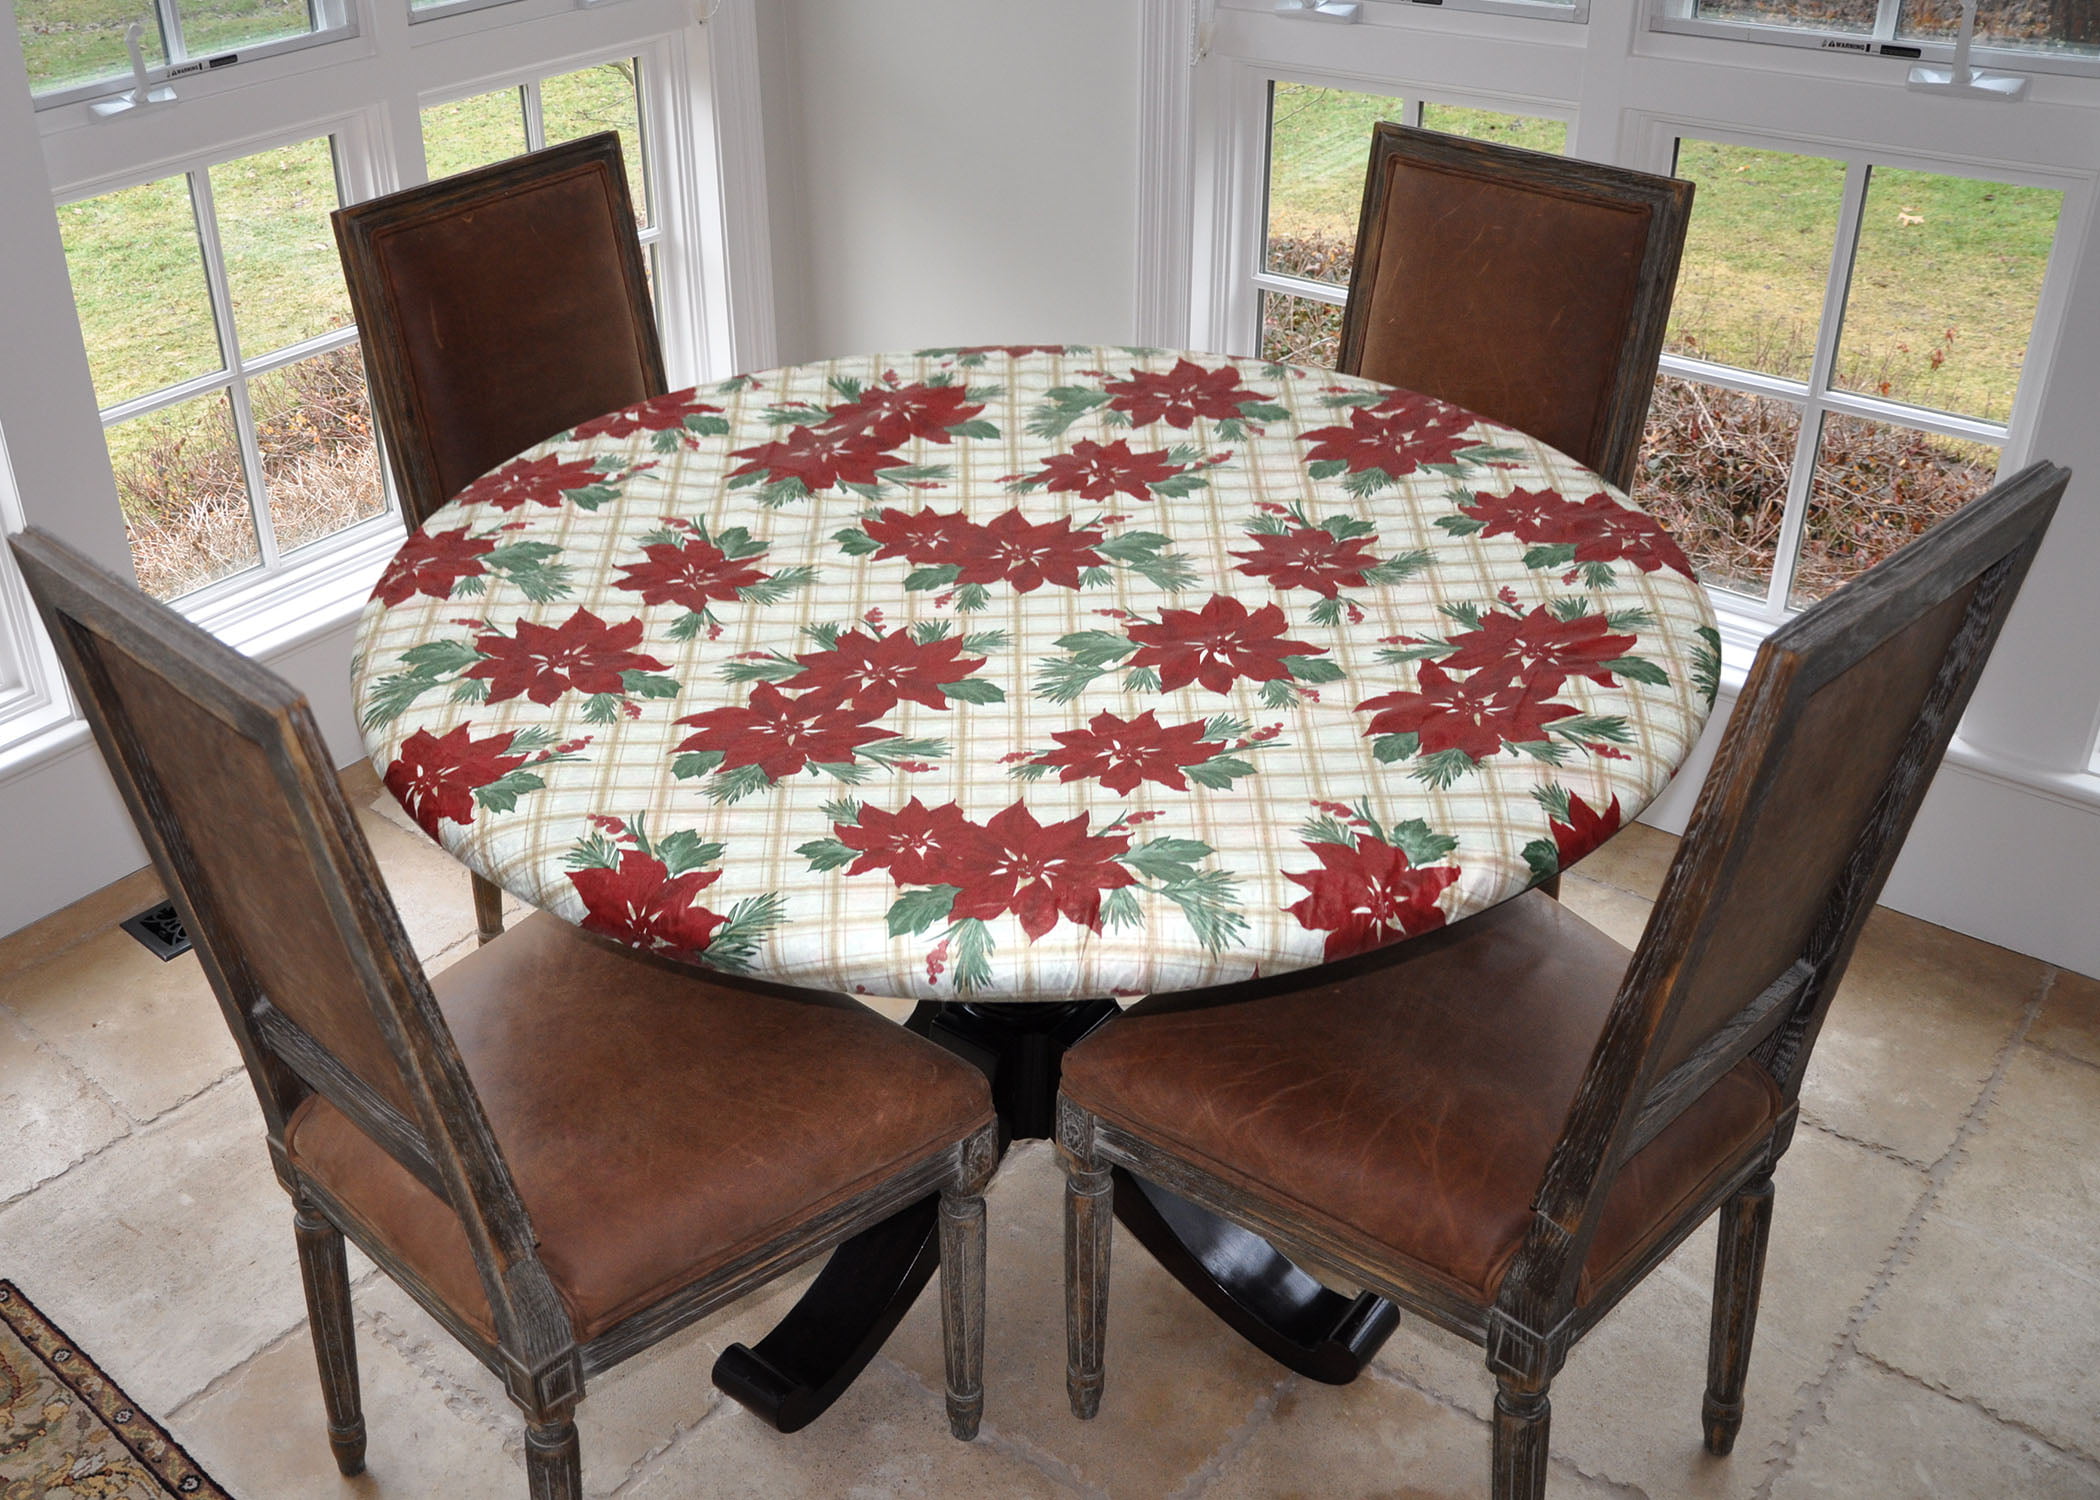 Pattern Beige Large Round Covers For The Home Deluxe Elastic Edged Flannel Backed Vinyl Fitted Table Cover Fits Tables up to 45-56 Diameter Basketweave 